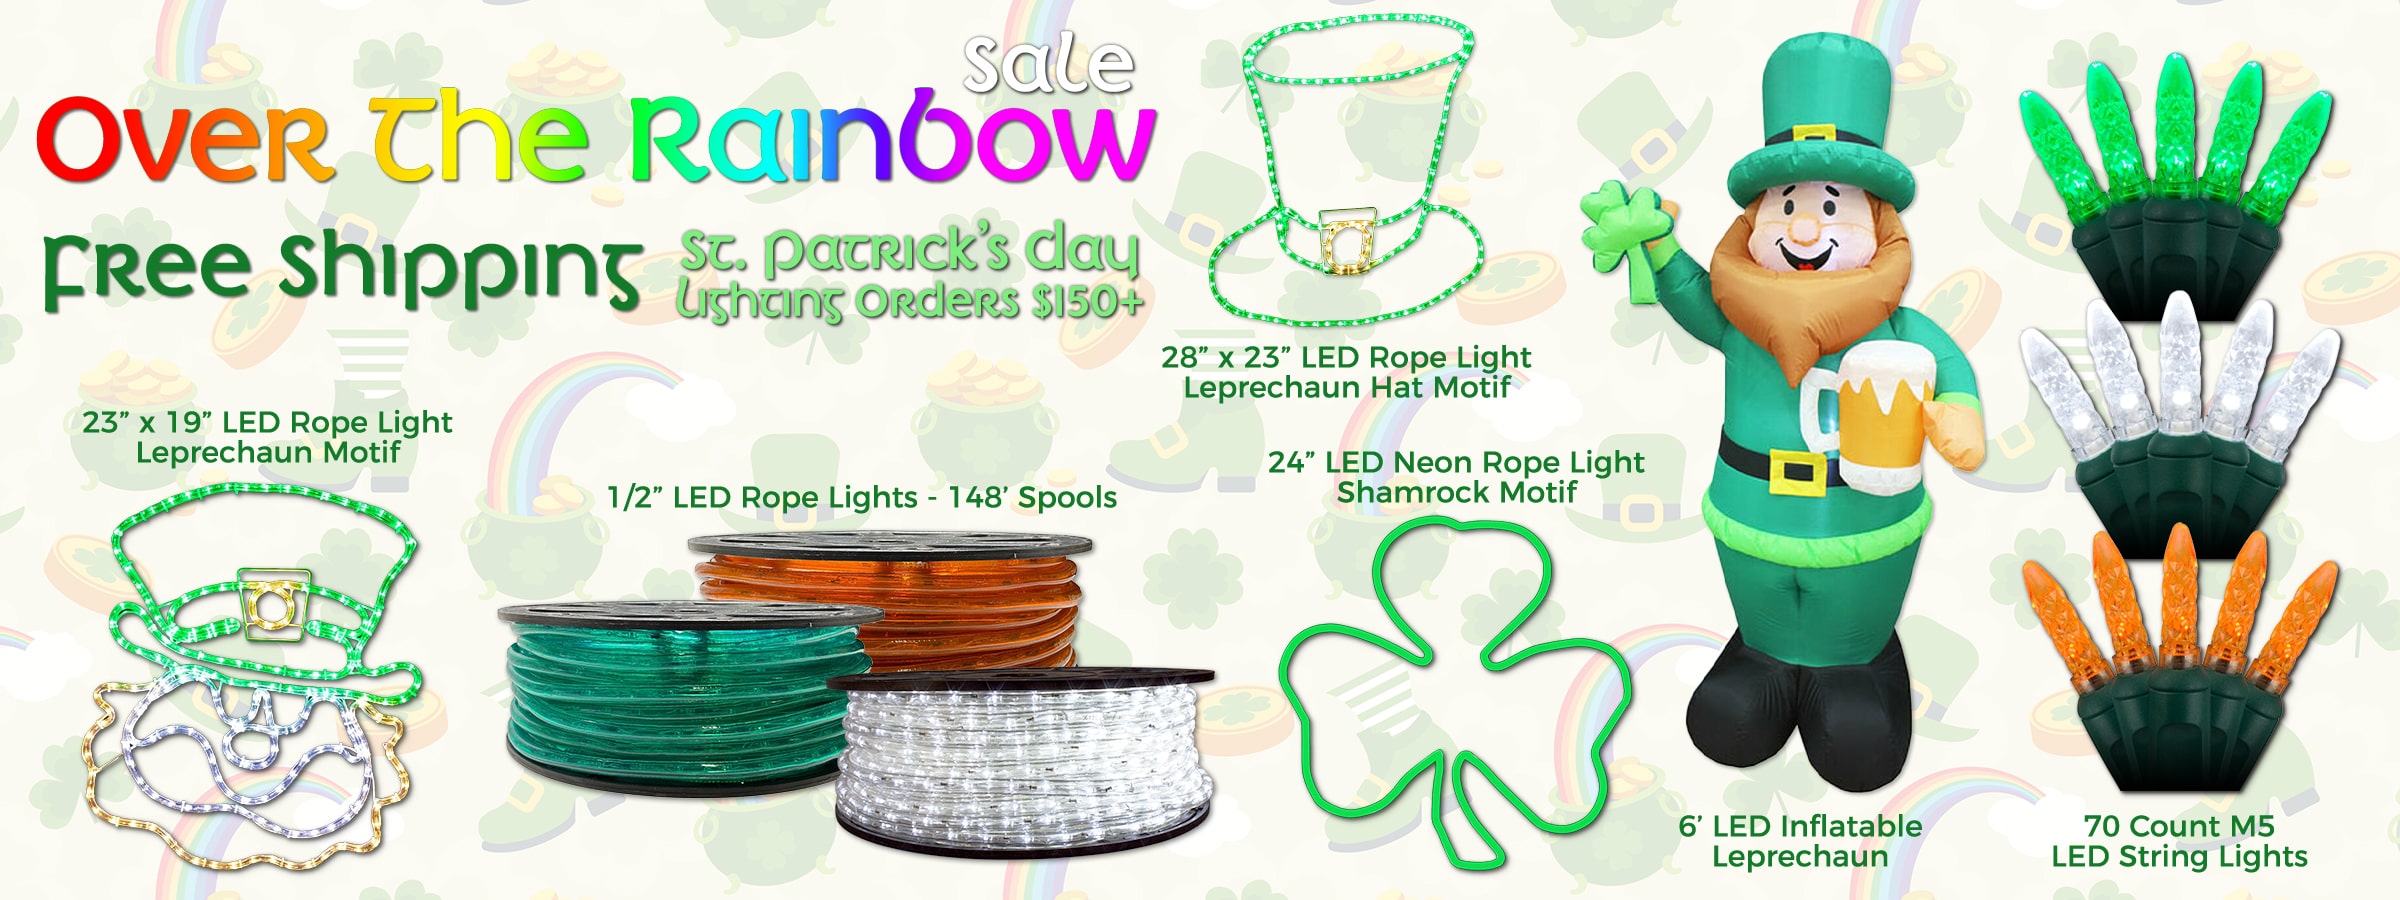 Free Shipping on St. Pattys Day Lighting orders $150+!